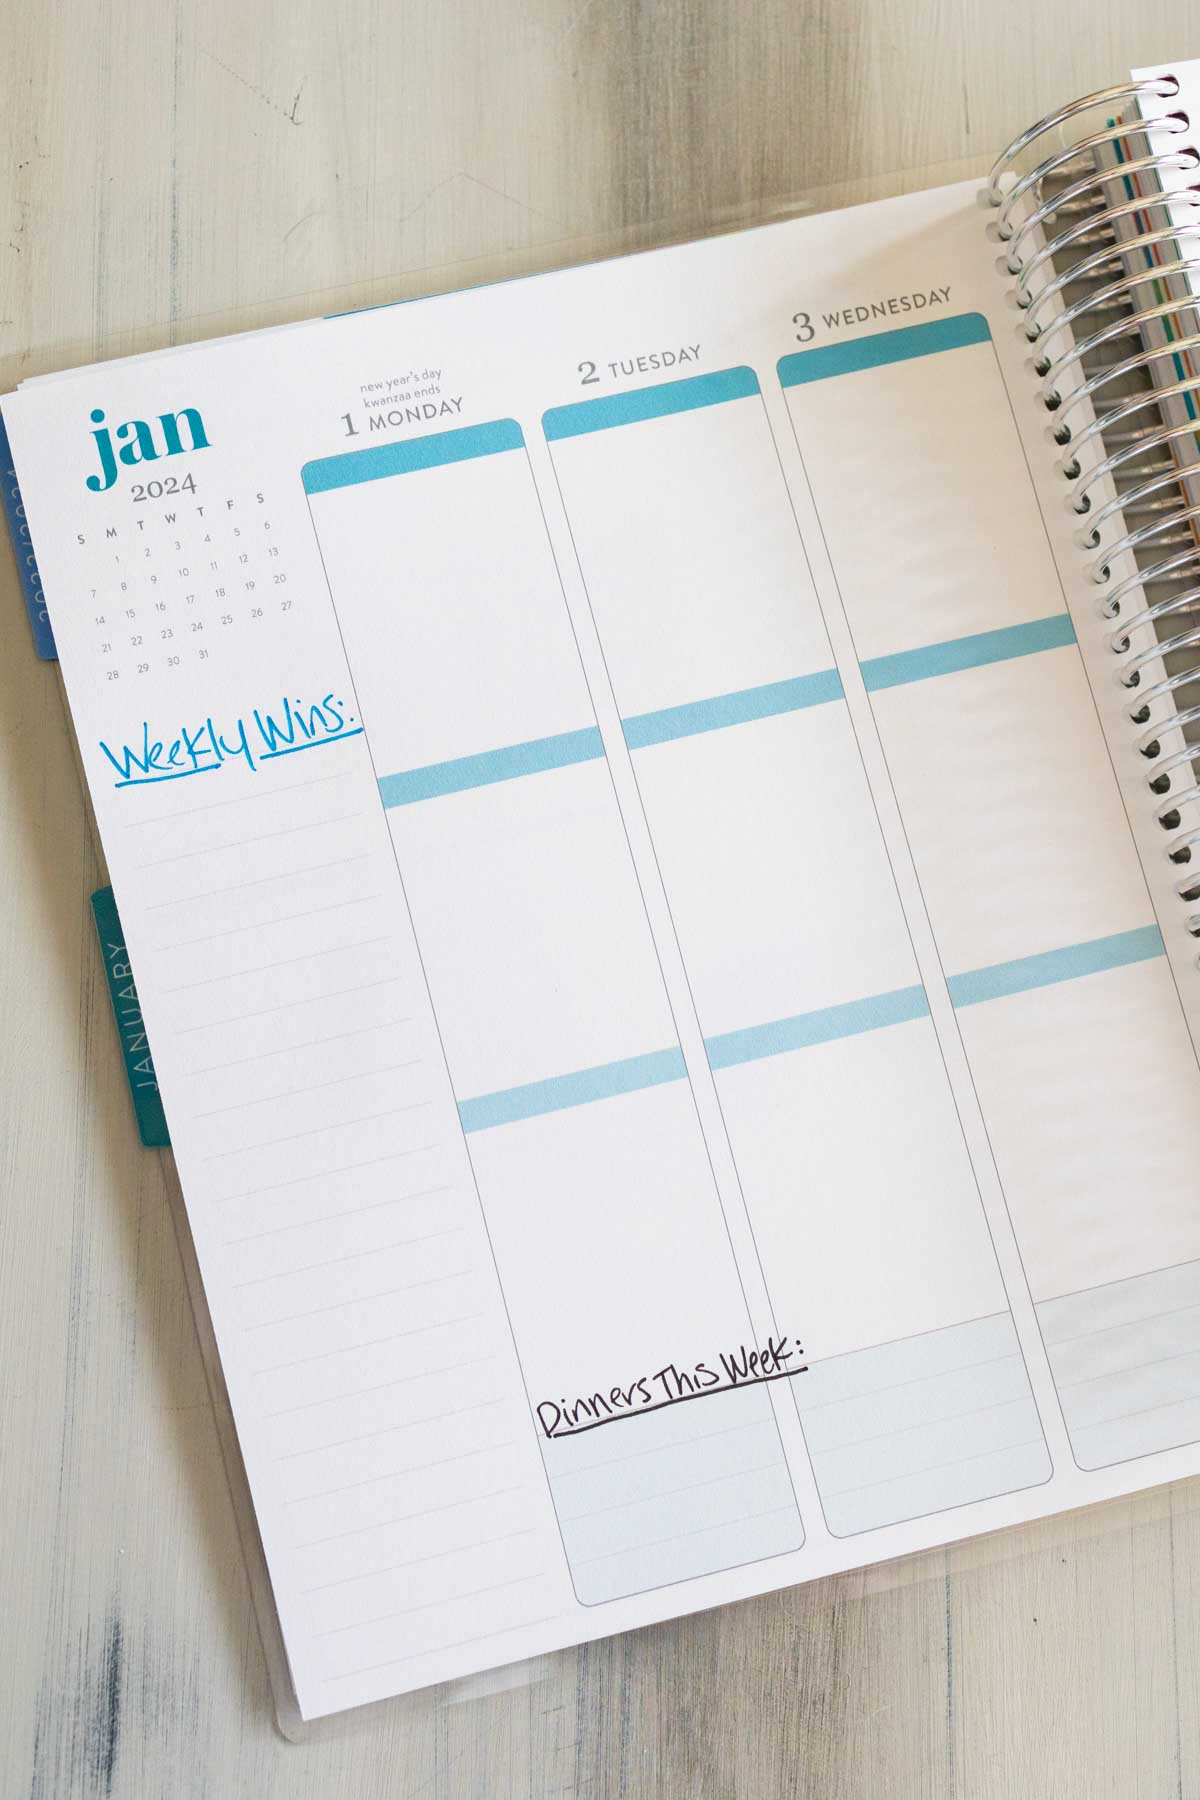 The planner is open so you can see the weekly planning page design layout.